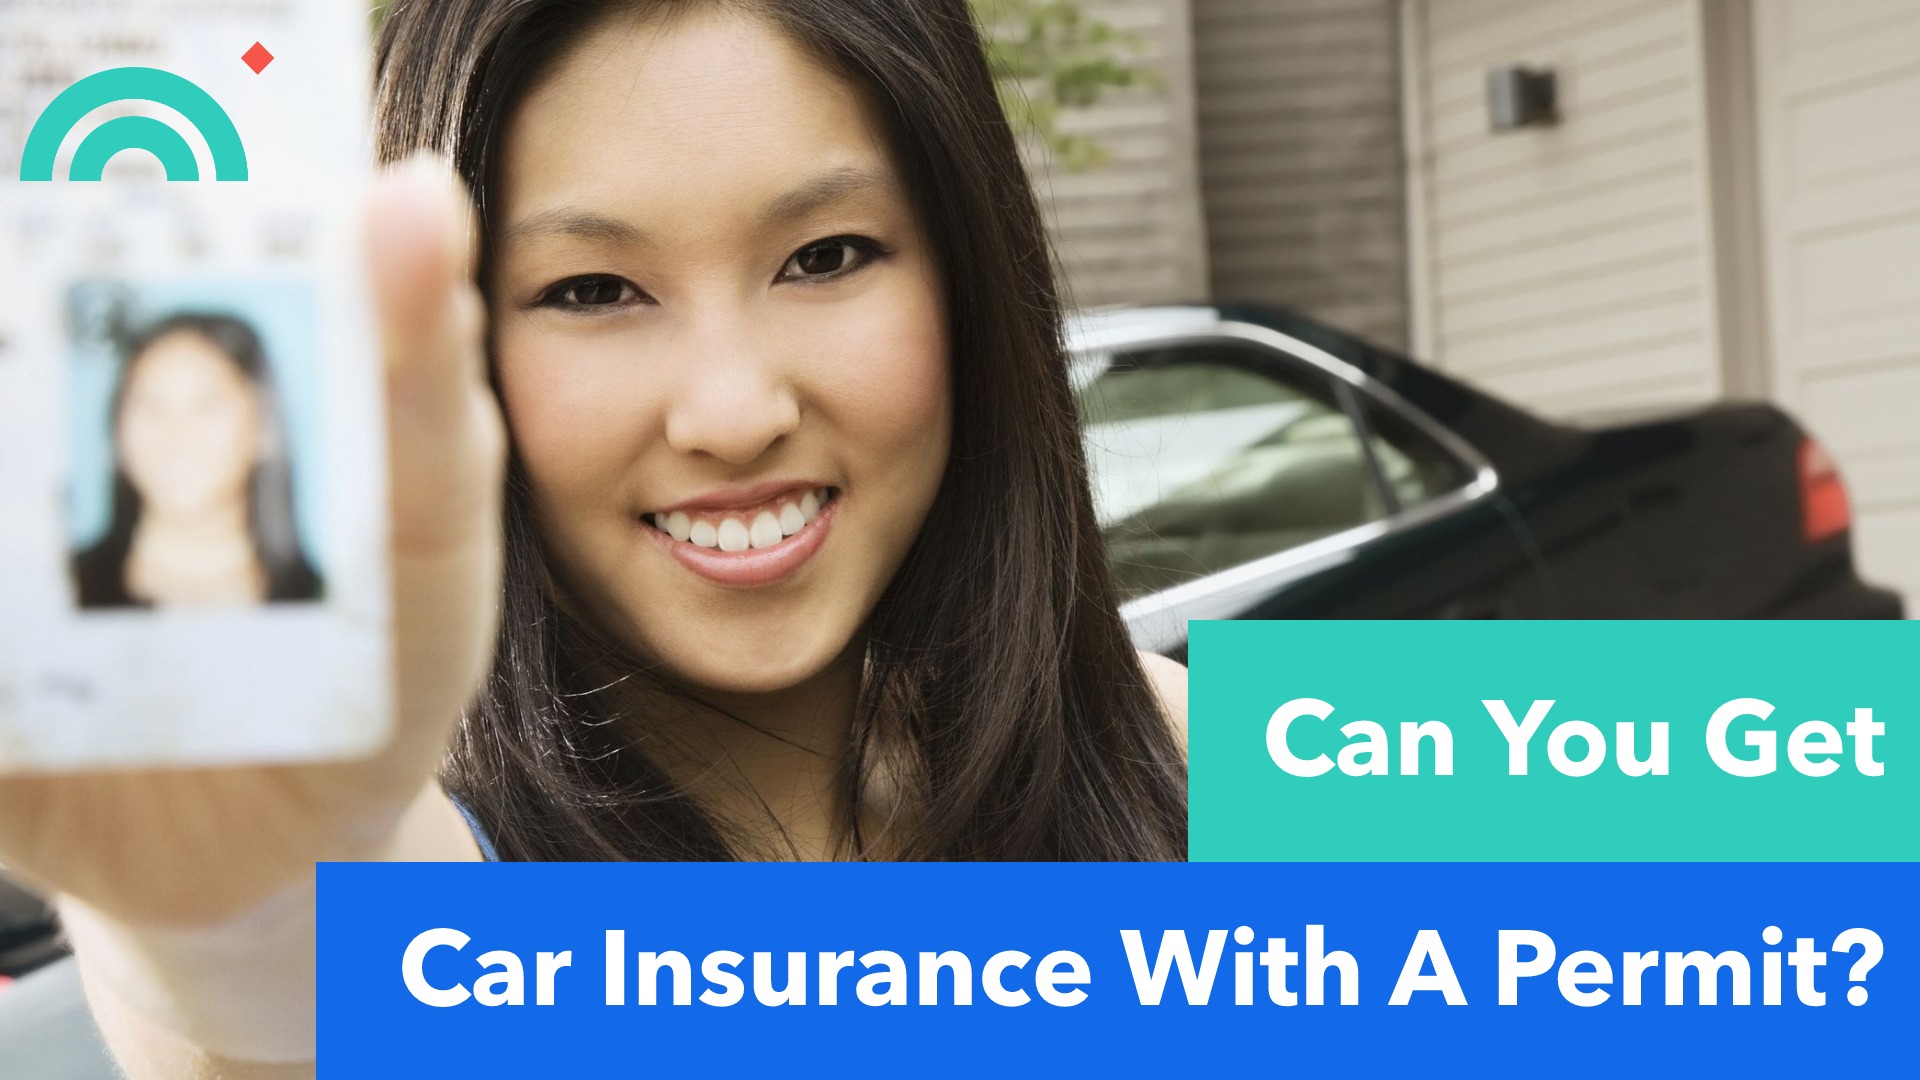 Can You Get Car Insurance With A Permit